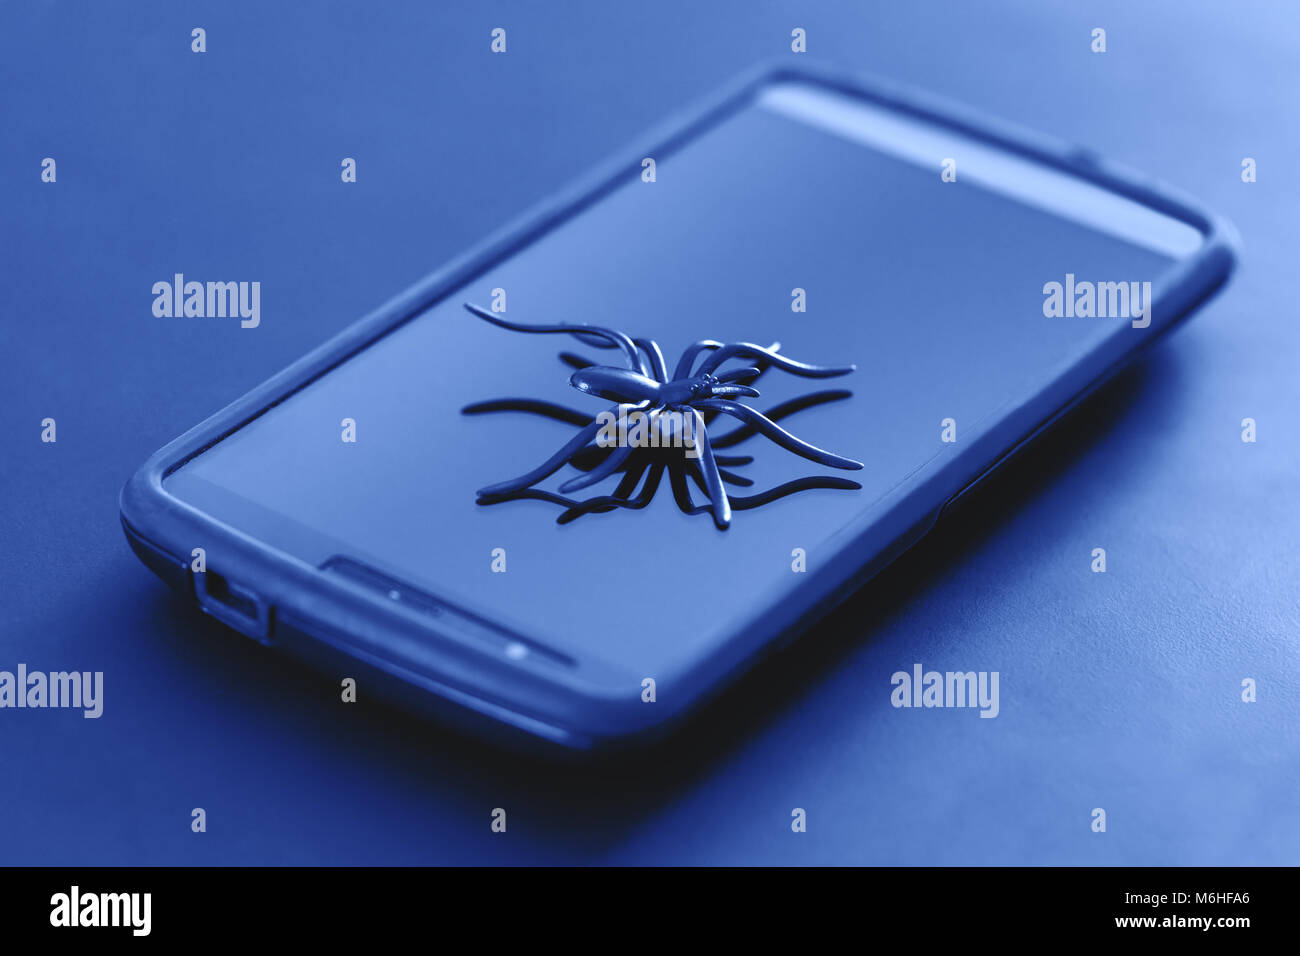 Plastic spider toy in action of running on surface of cell display. Great spider toy posing on surface of smartphone. Telecommunications. Stock Photo